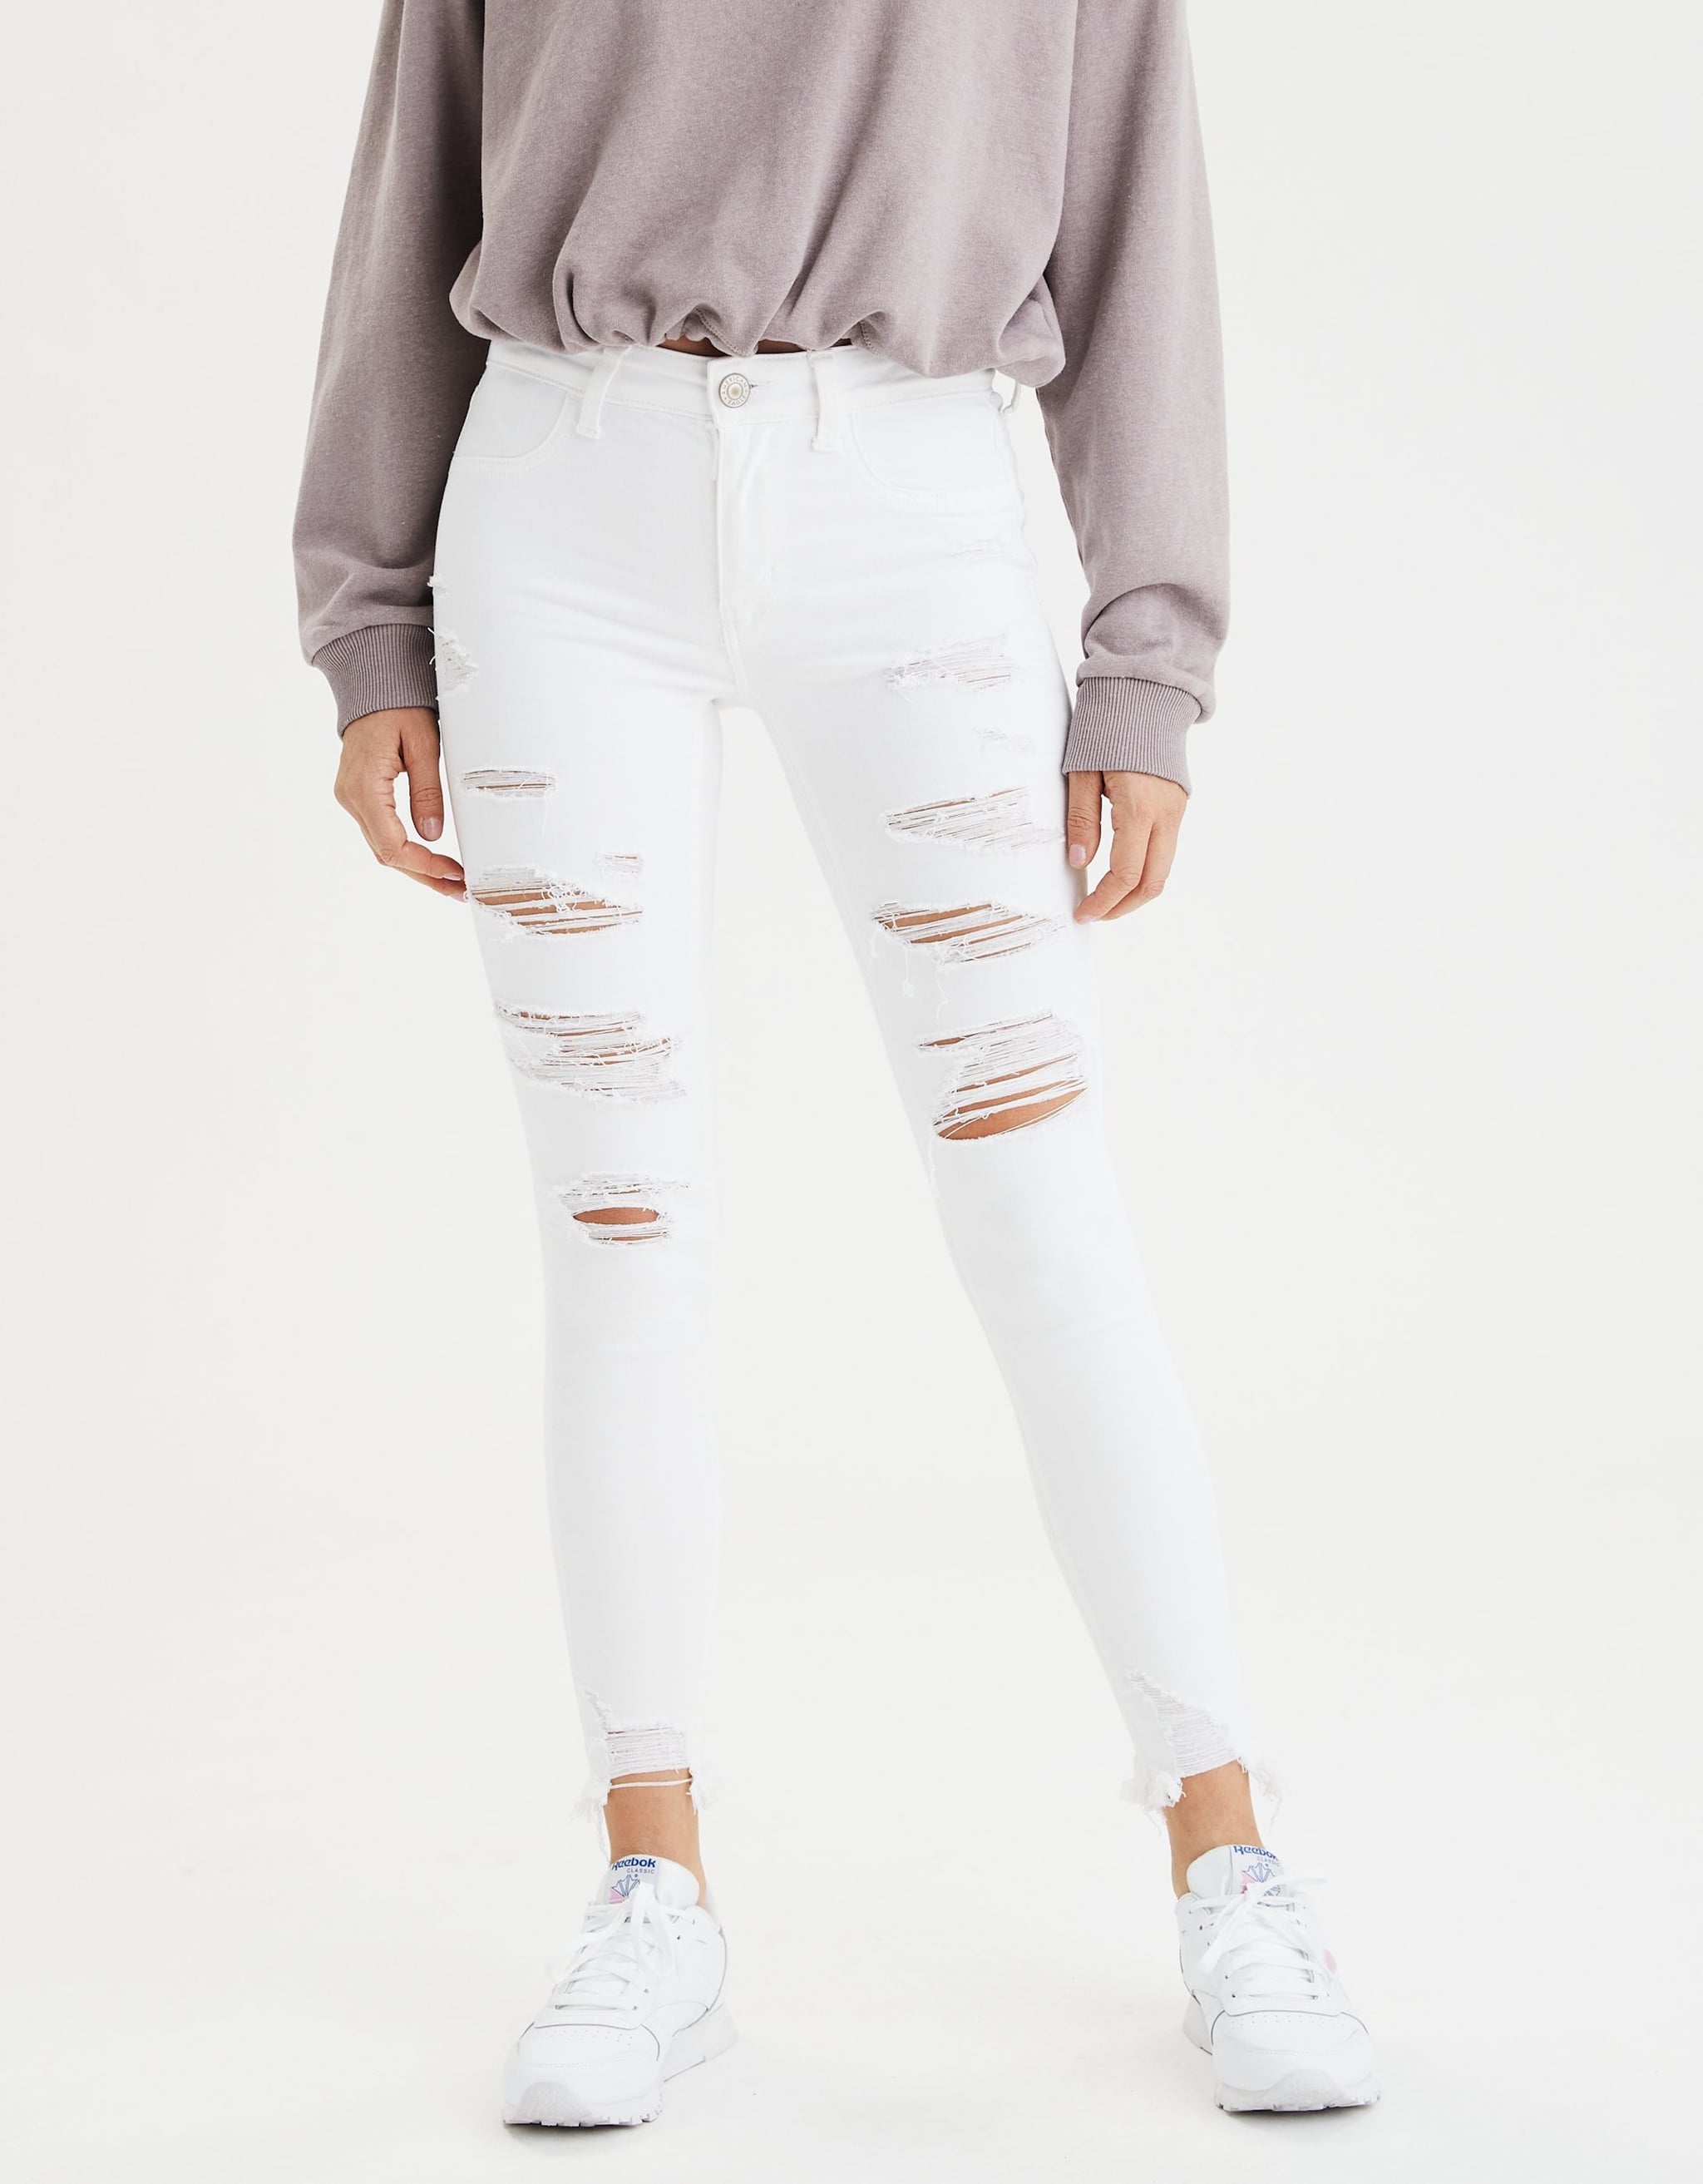 Buy > womens white ripped jeans > in stock